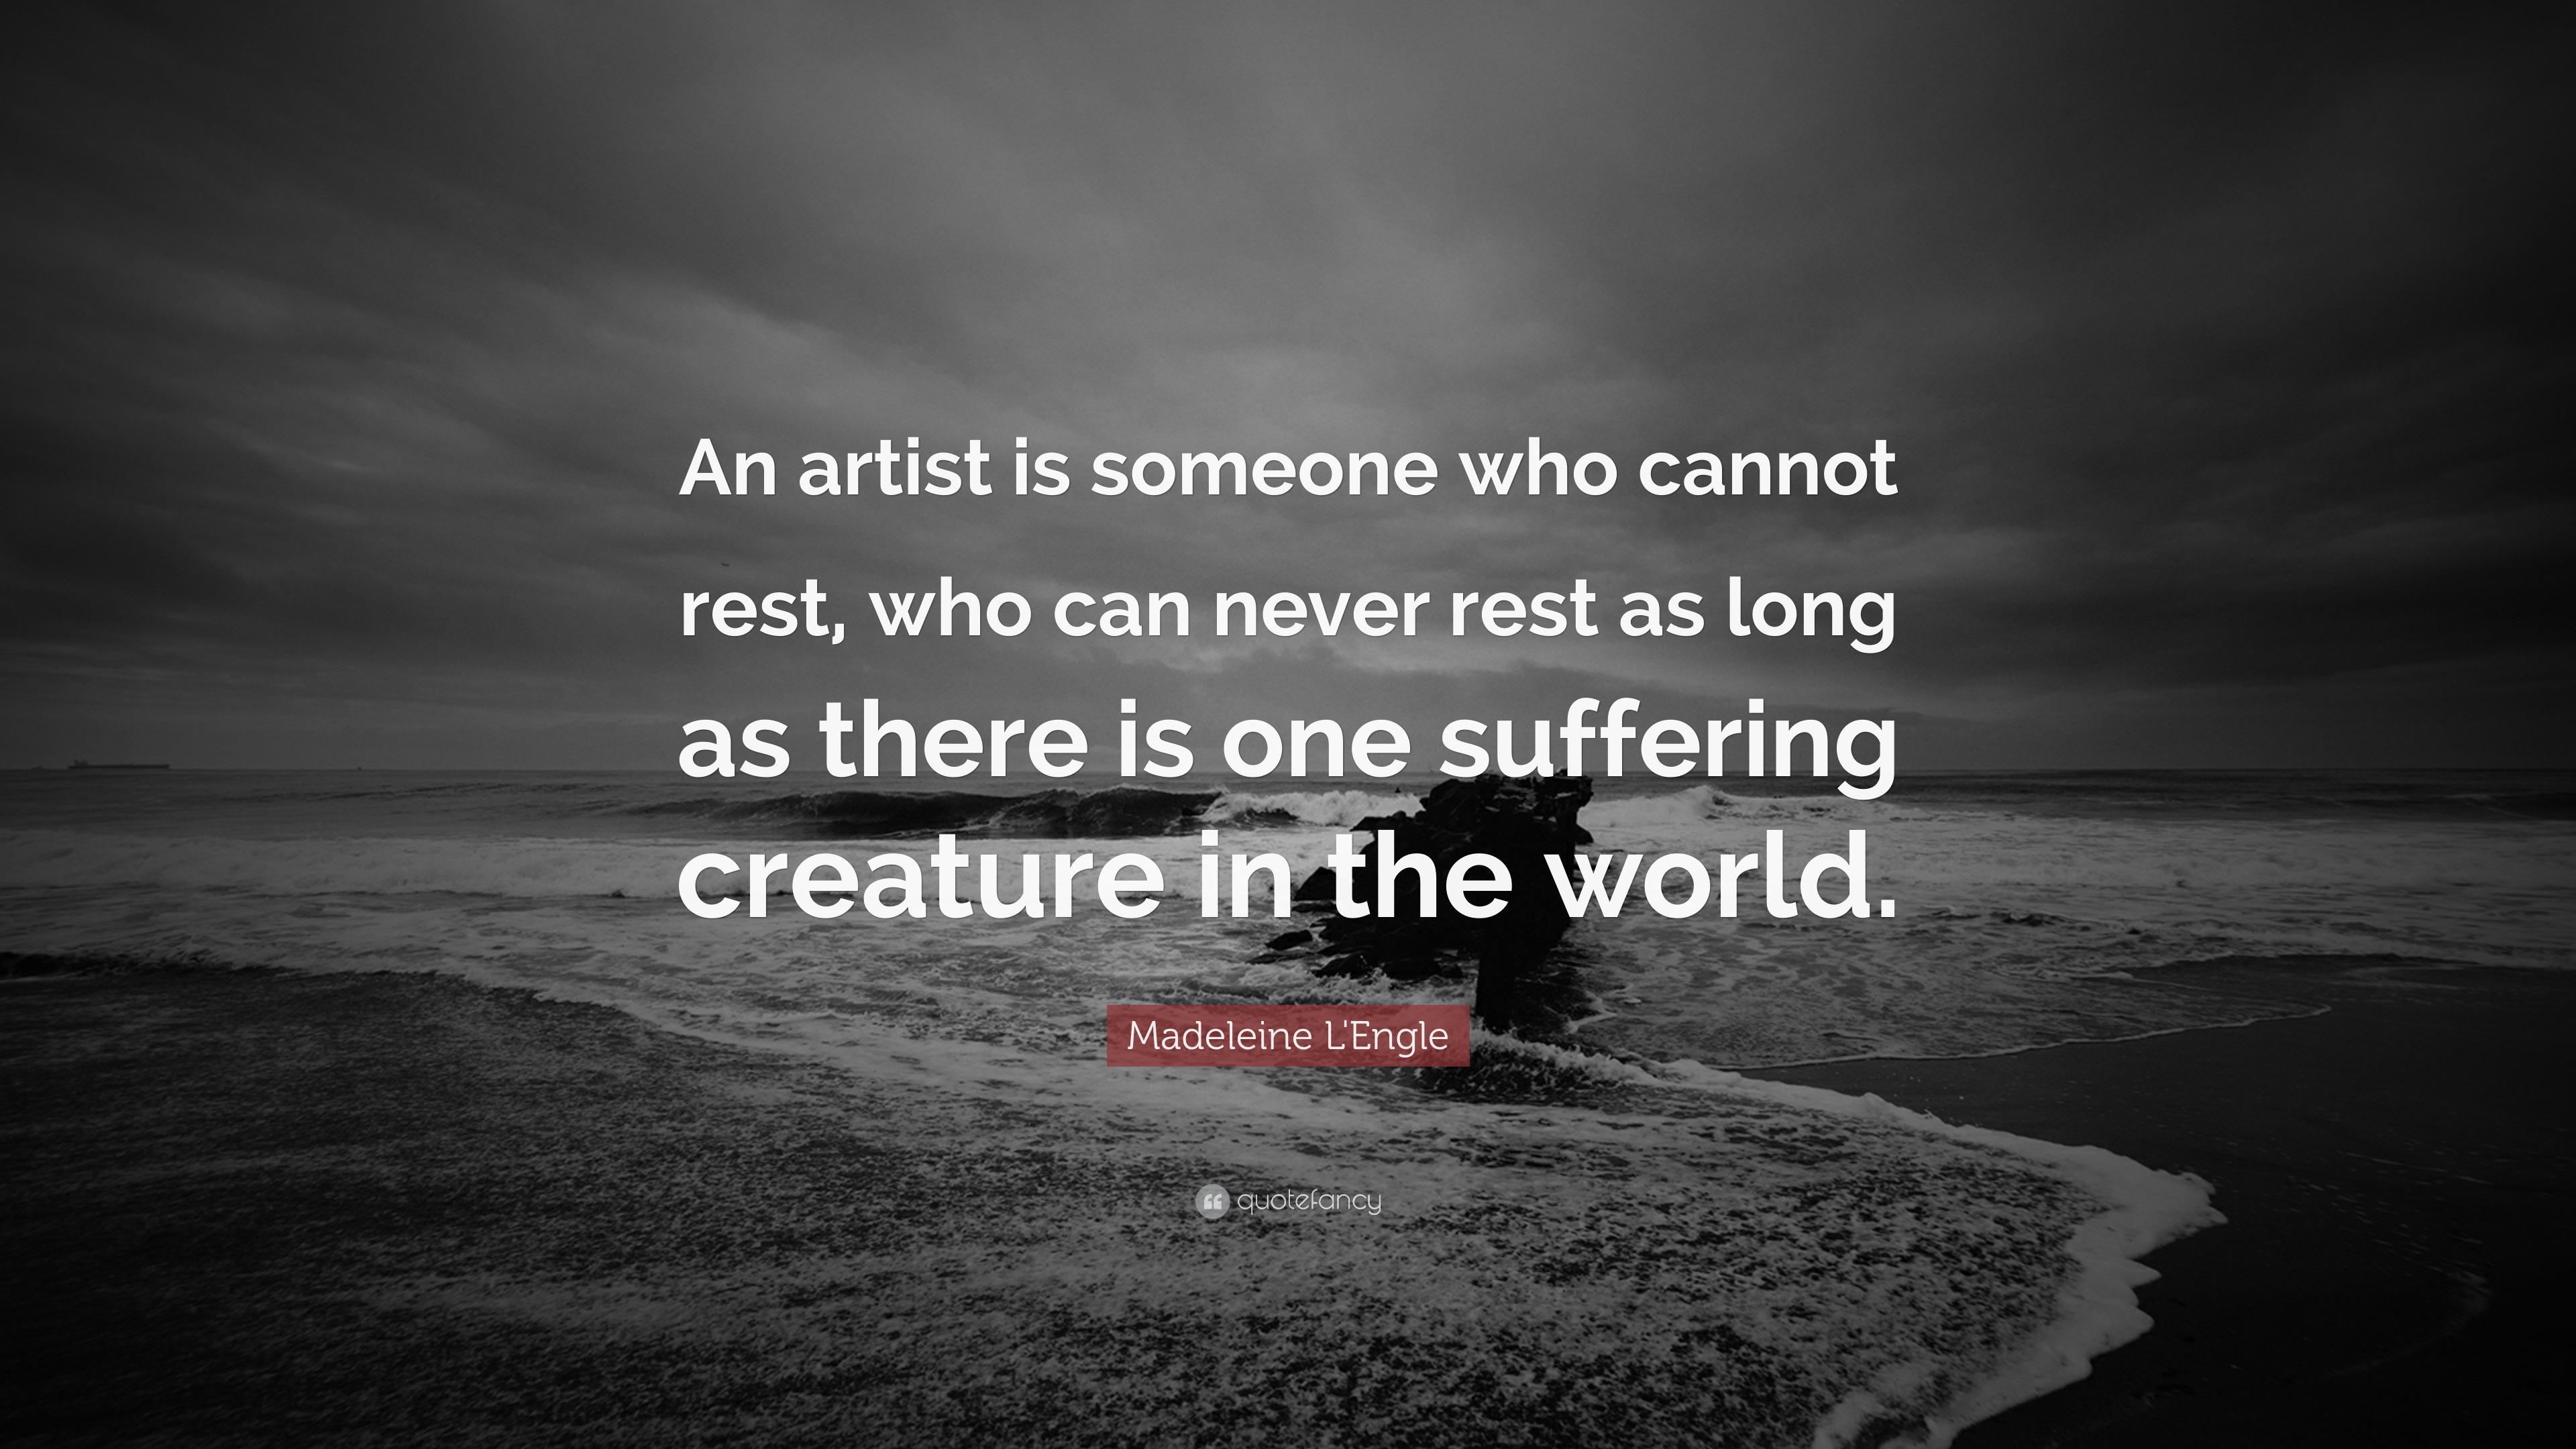 Madeleine L'Engle Quote: “An artist is someone who cannot rest, who can ...